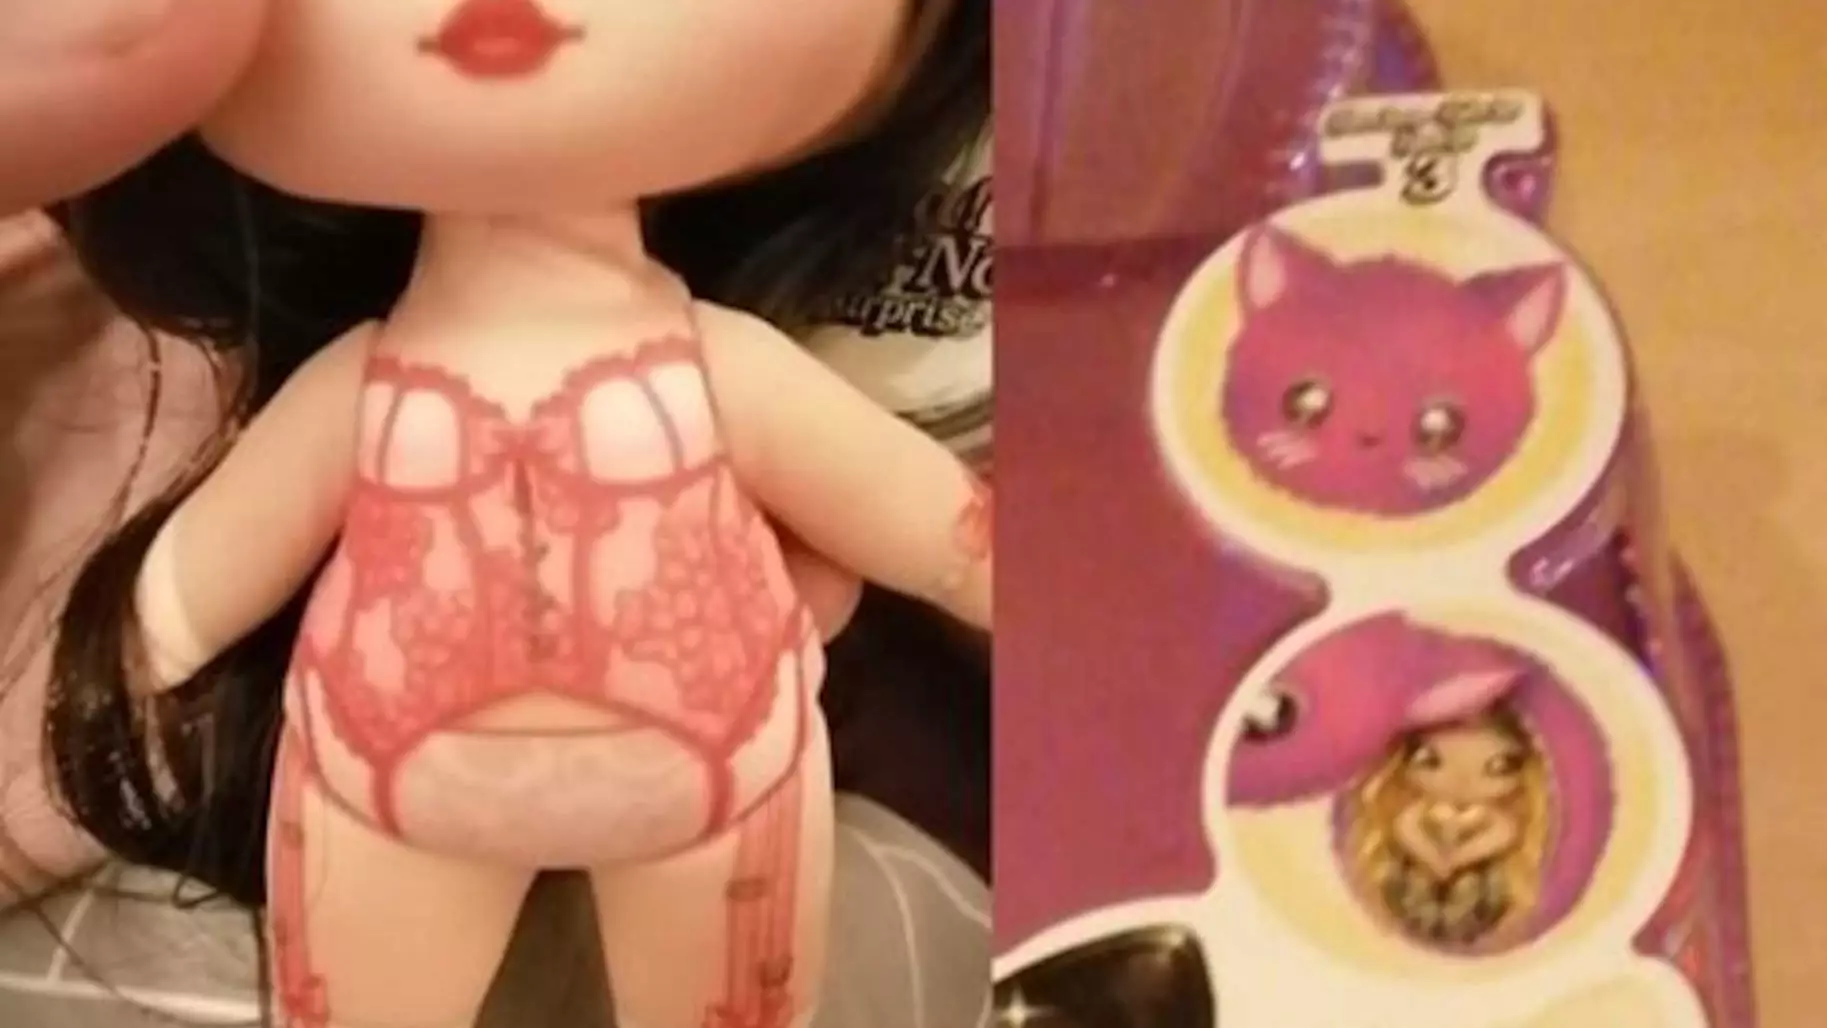 Tesco Removes Children's Doll From Stores After Complaints About It Being 'Sexualised'